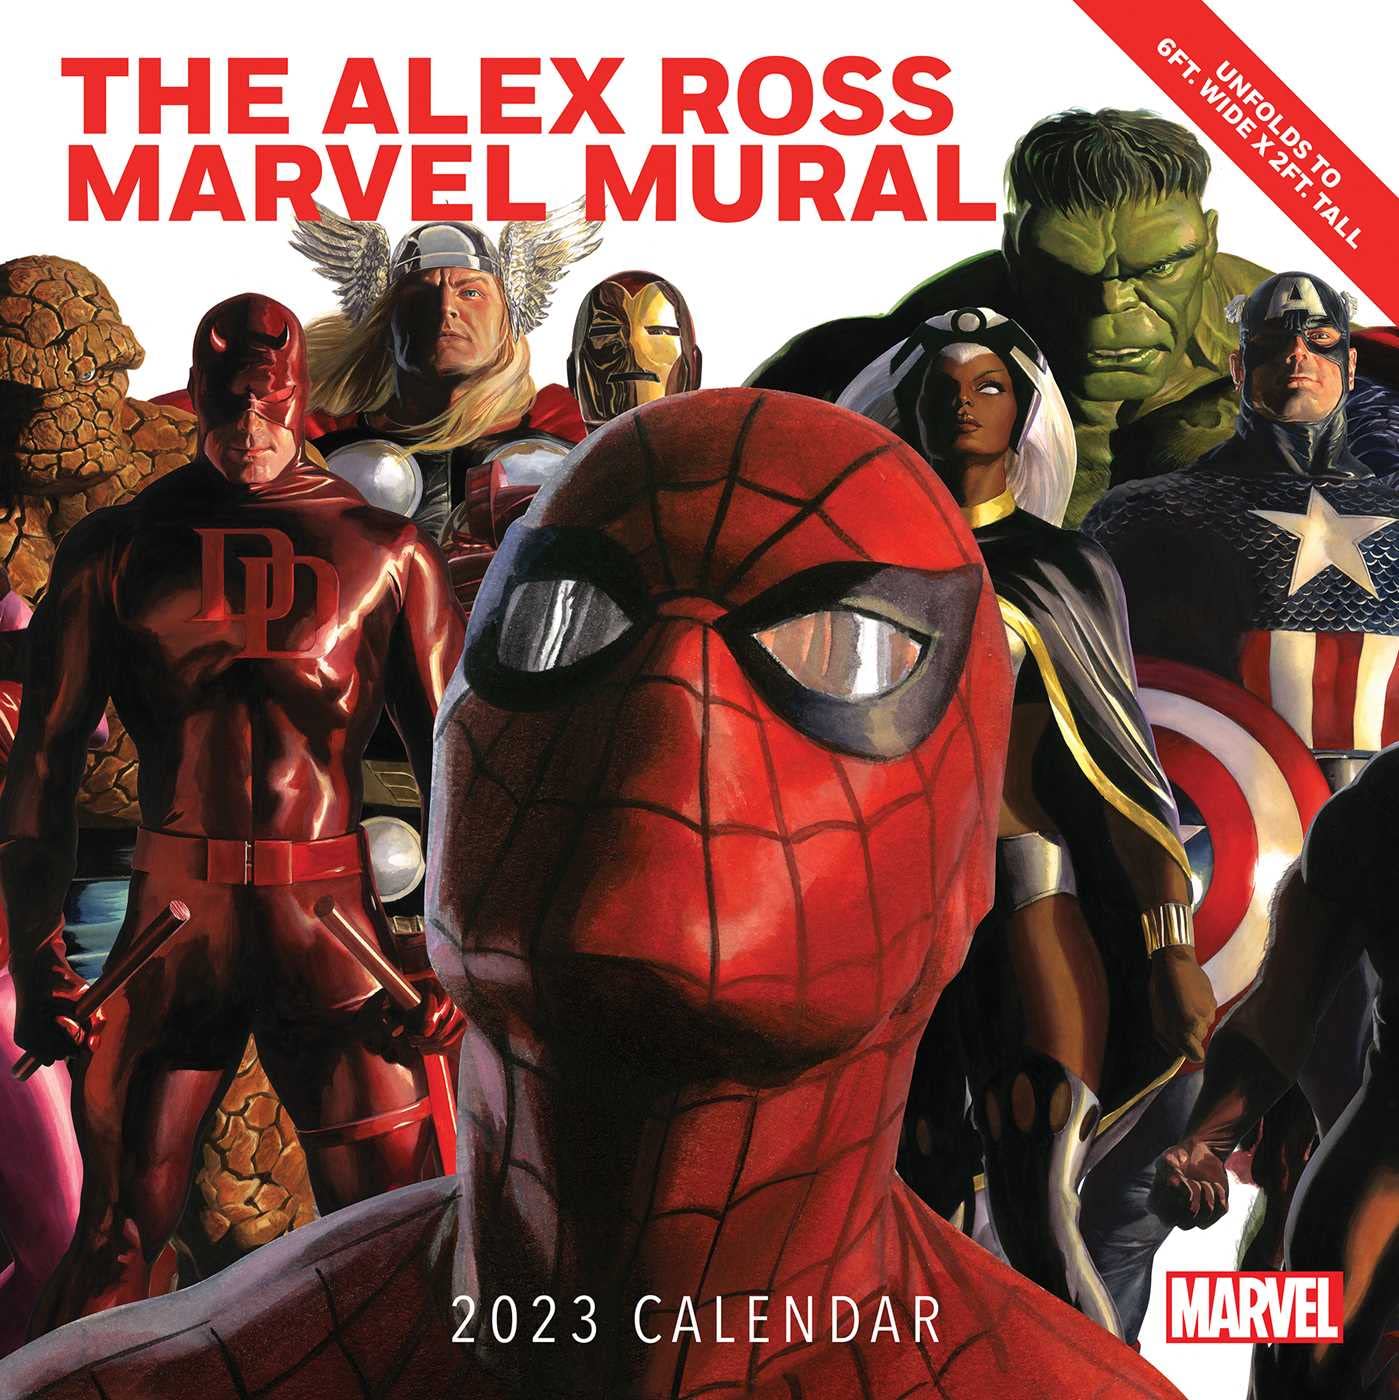 ALEX ROSS’ Massive MARVEL MURAL to Be Released As Enormous Calendar